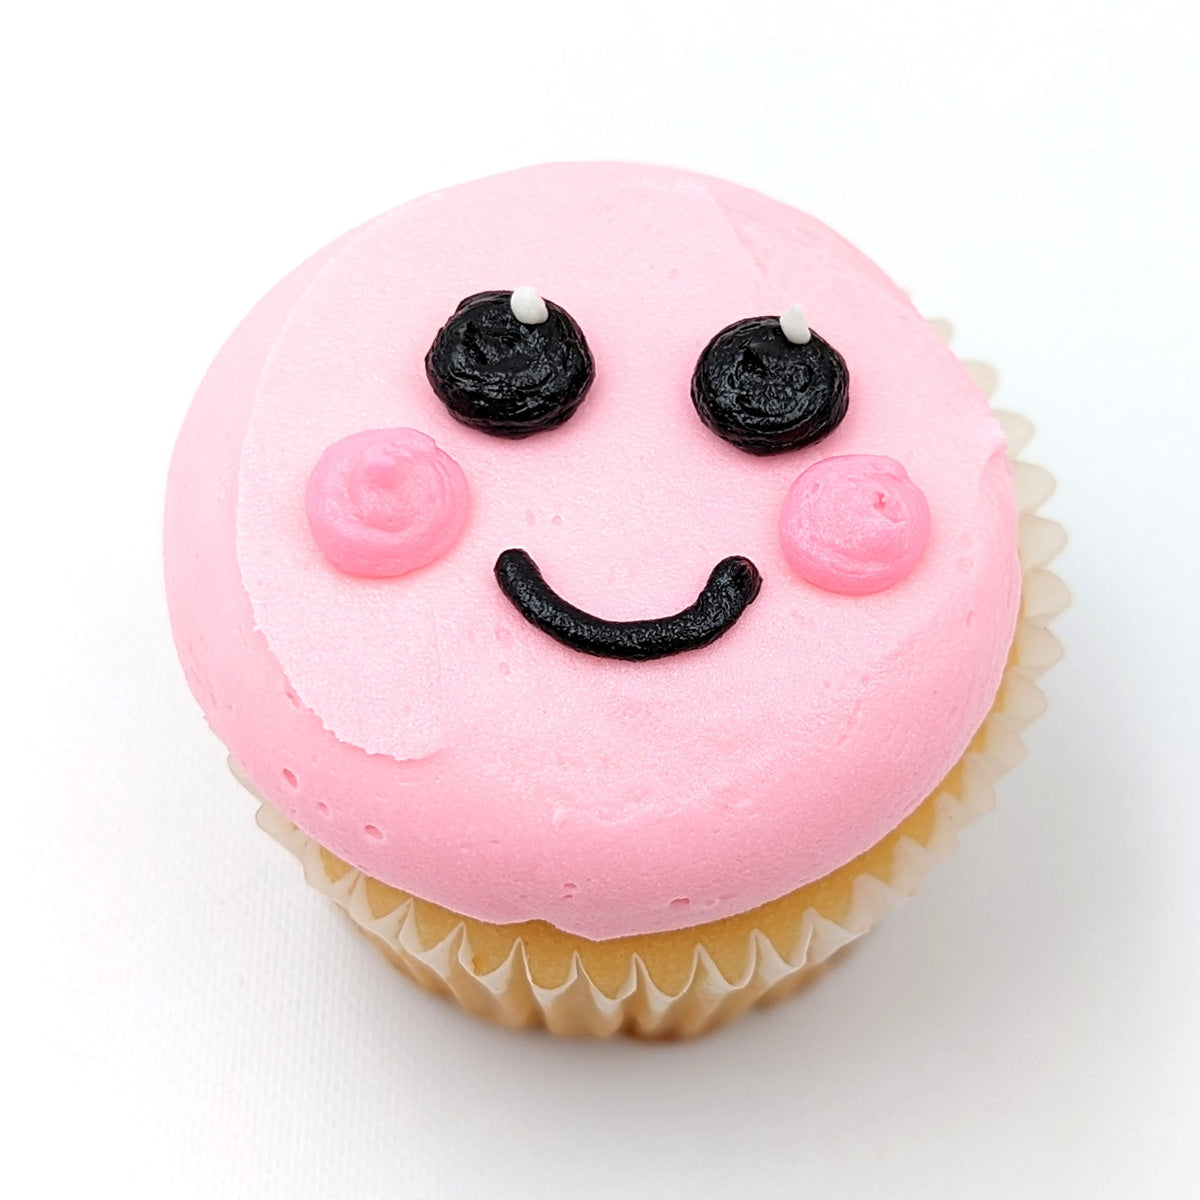 girly smiley face images